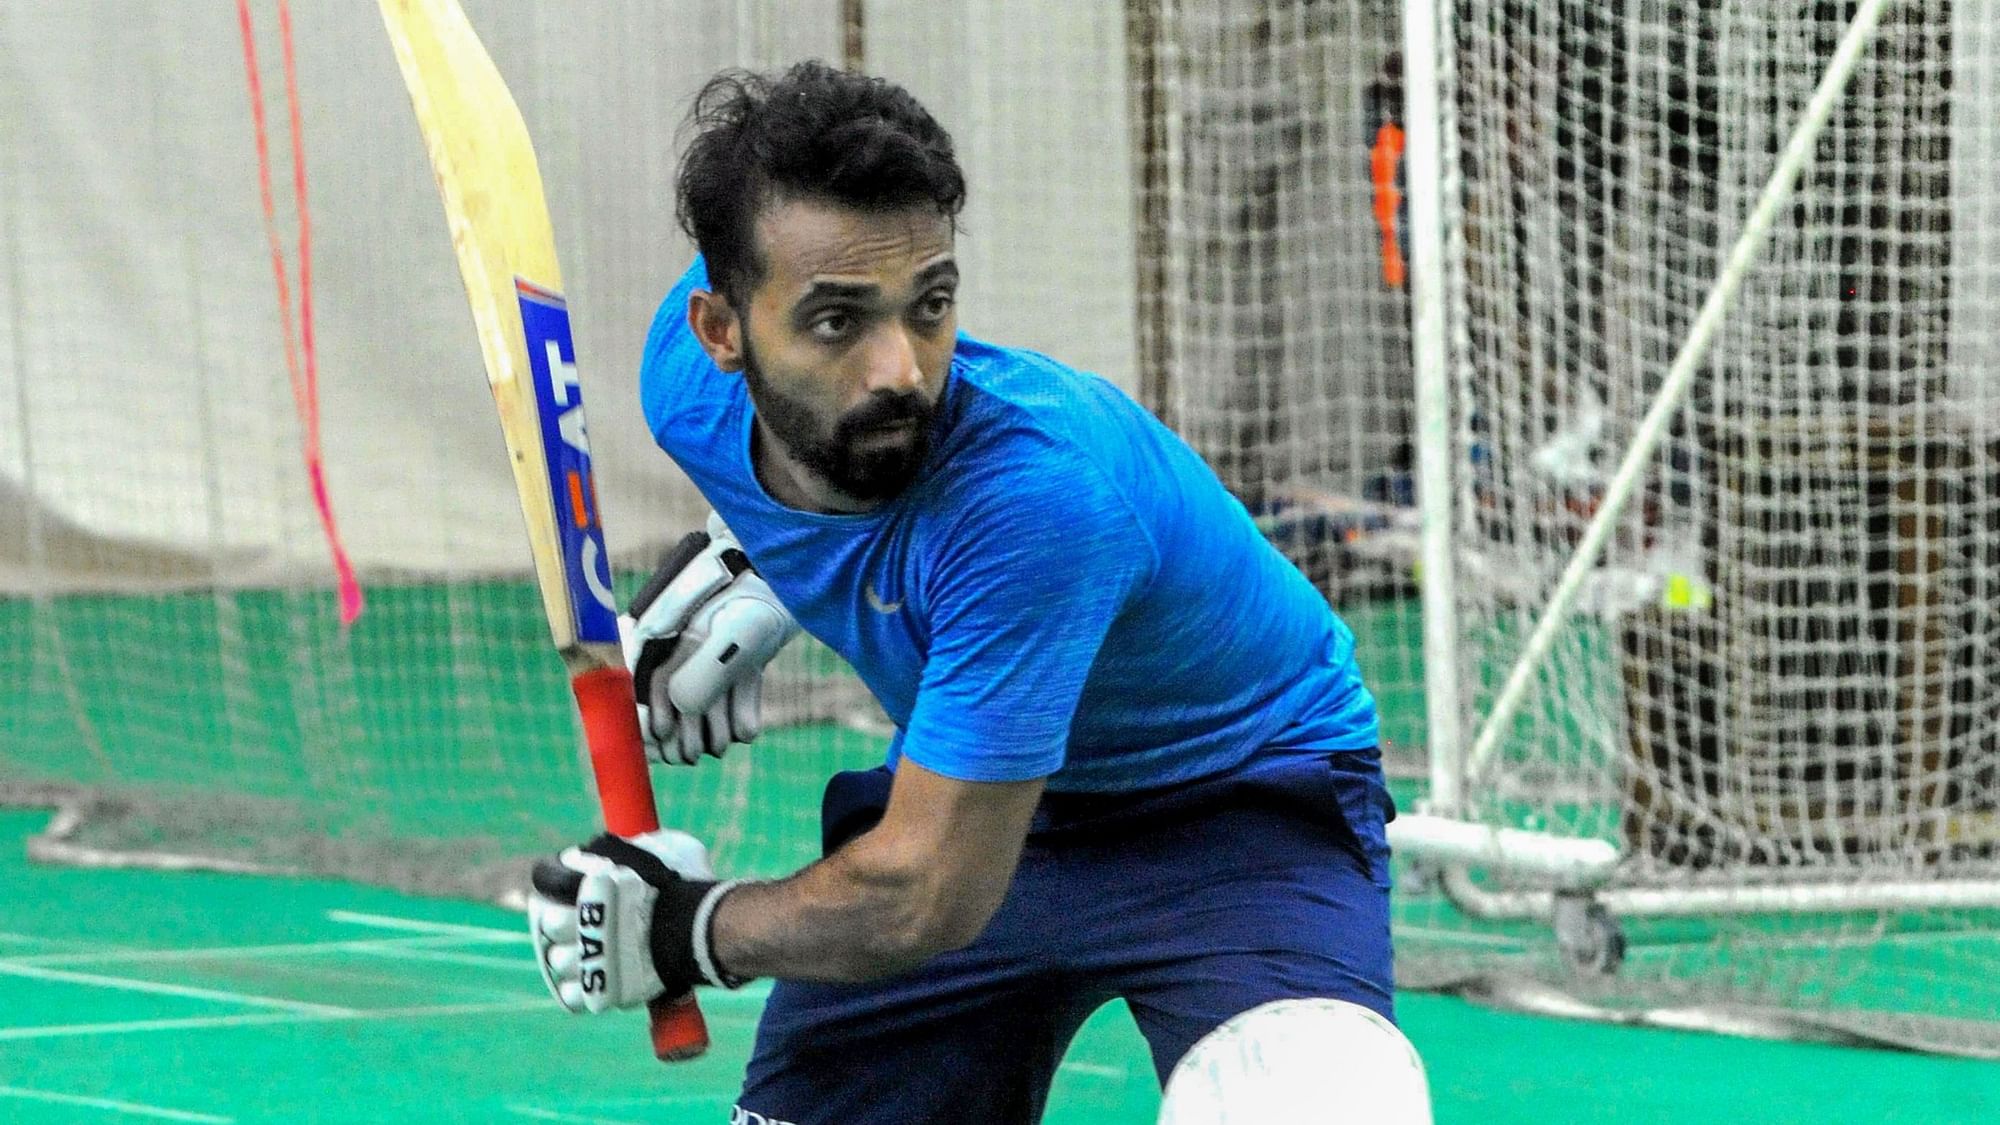 India’s Test deputy Ajinkya Rahane has asked the BCCI for permission to play for Hampshire in the months of May, June and mid-July.